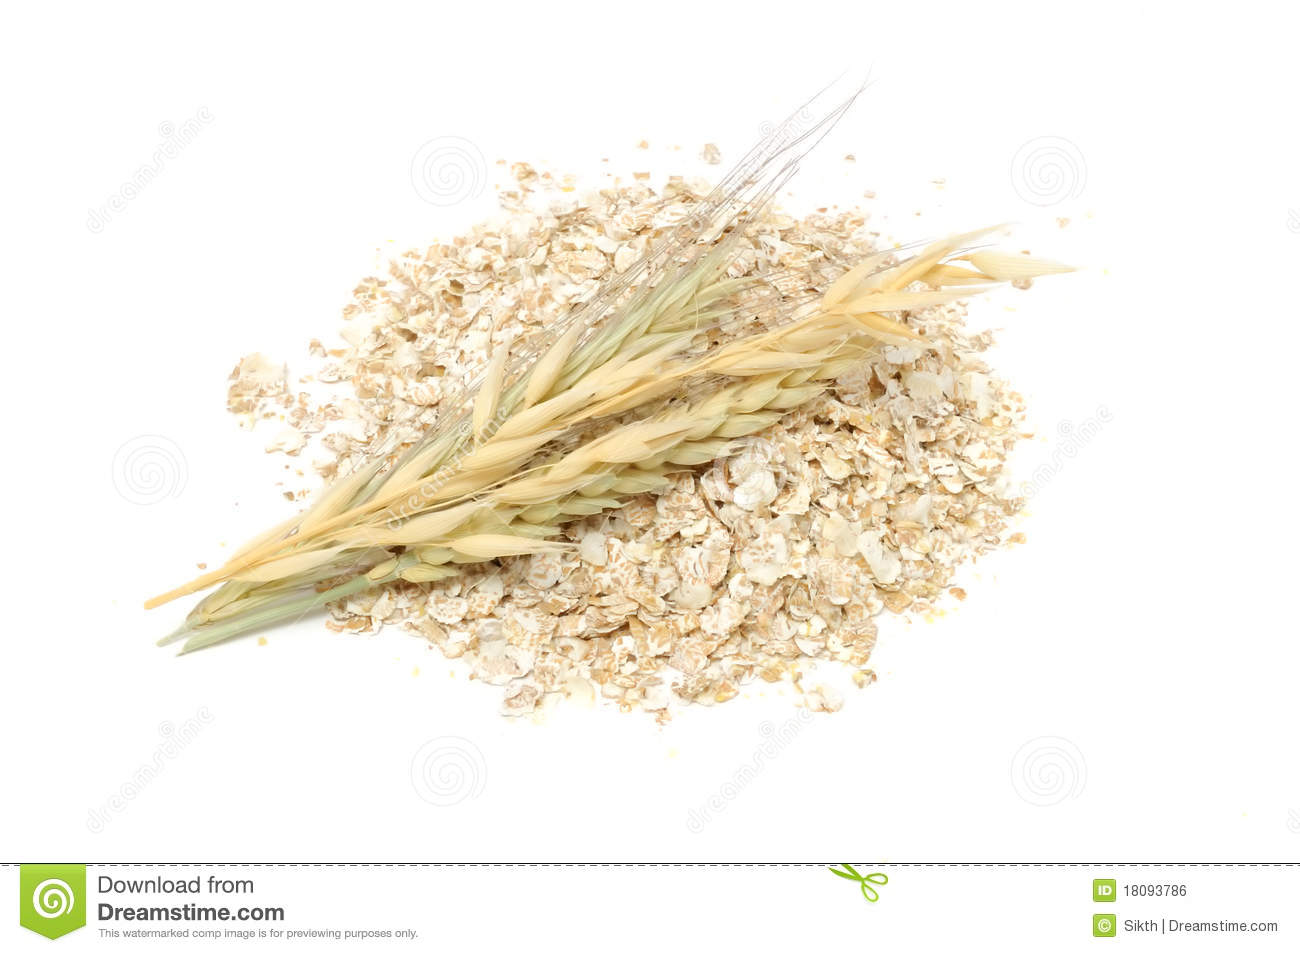 Wheat Oat And Rye Flakes With Ears Royalty Free Stock Image   Image